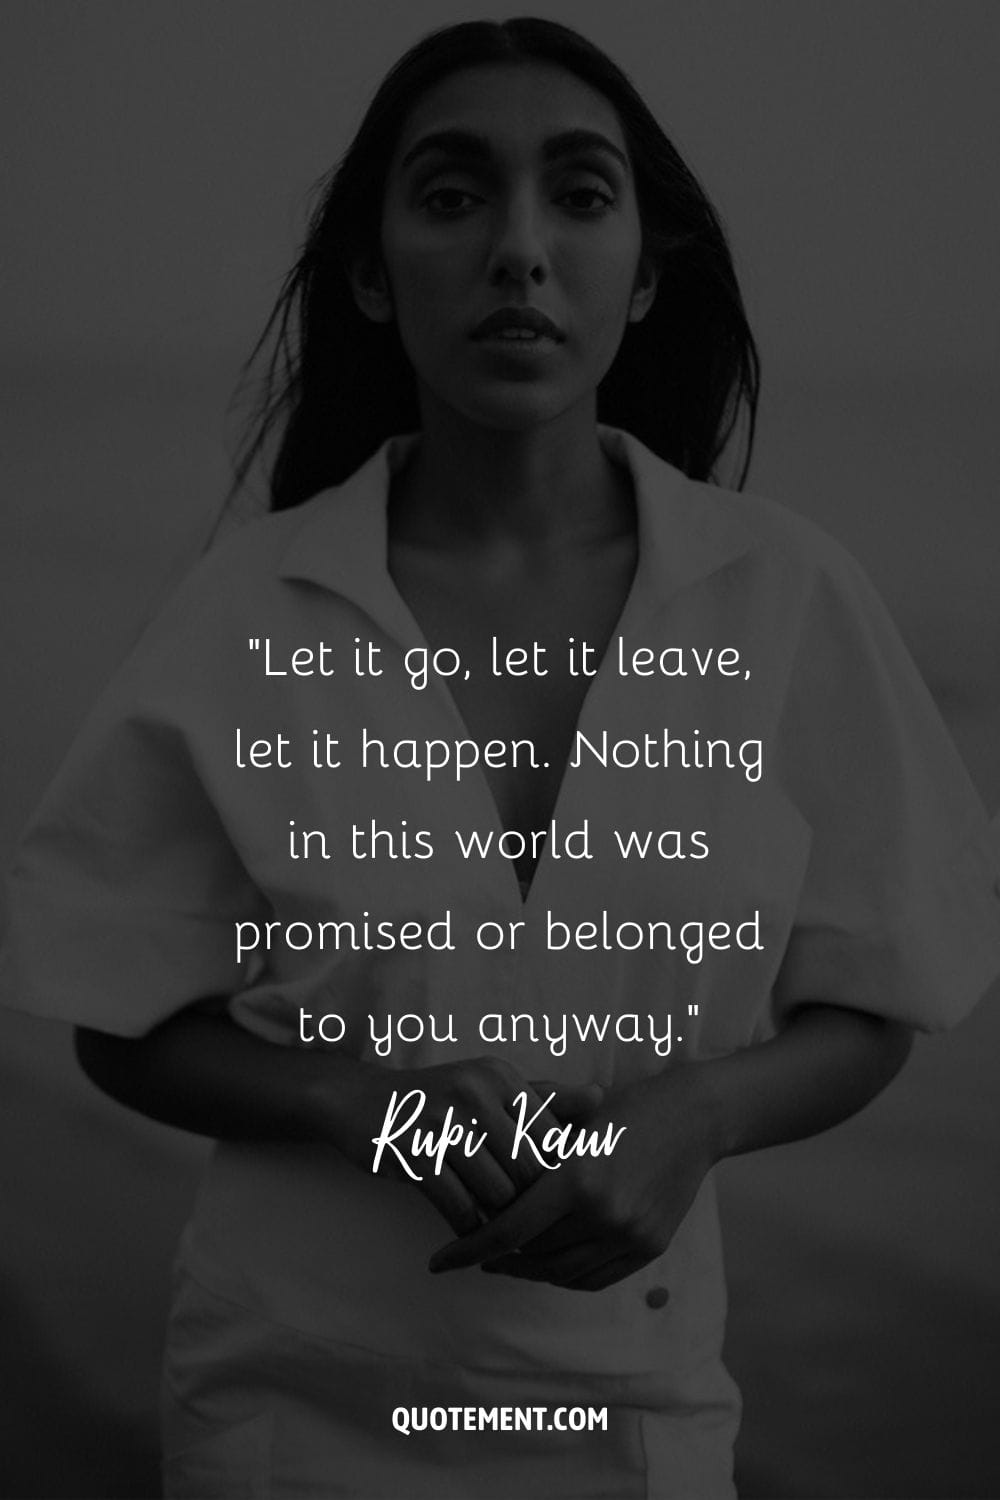 Let it go, let it leave, let it happen. Nothing in this world was promised or belonged to you anyway.